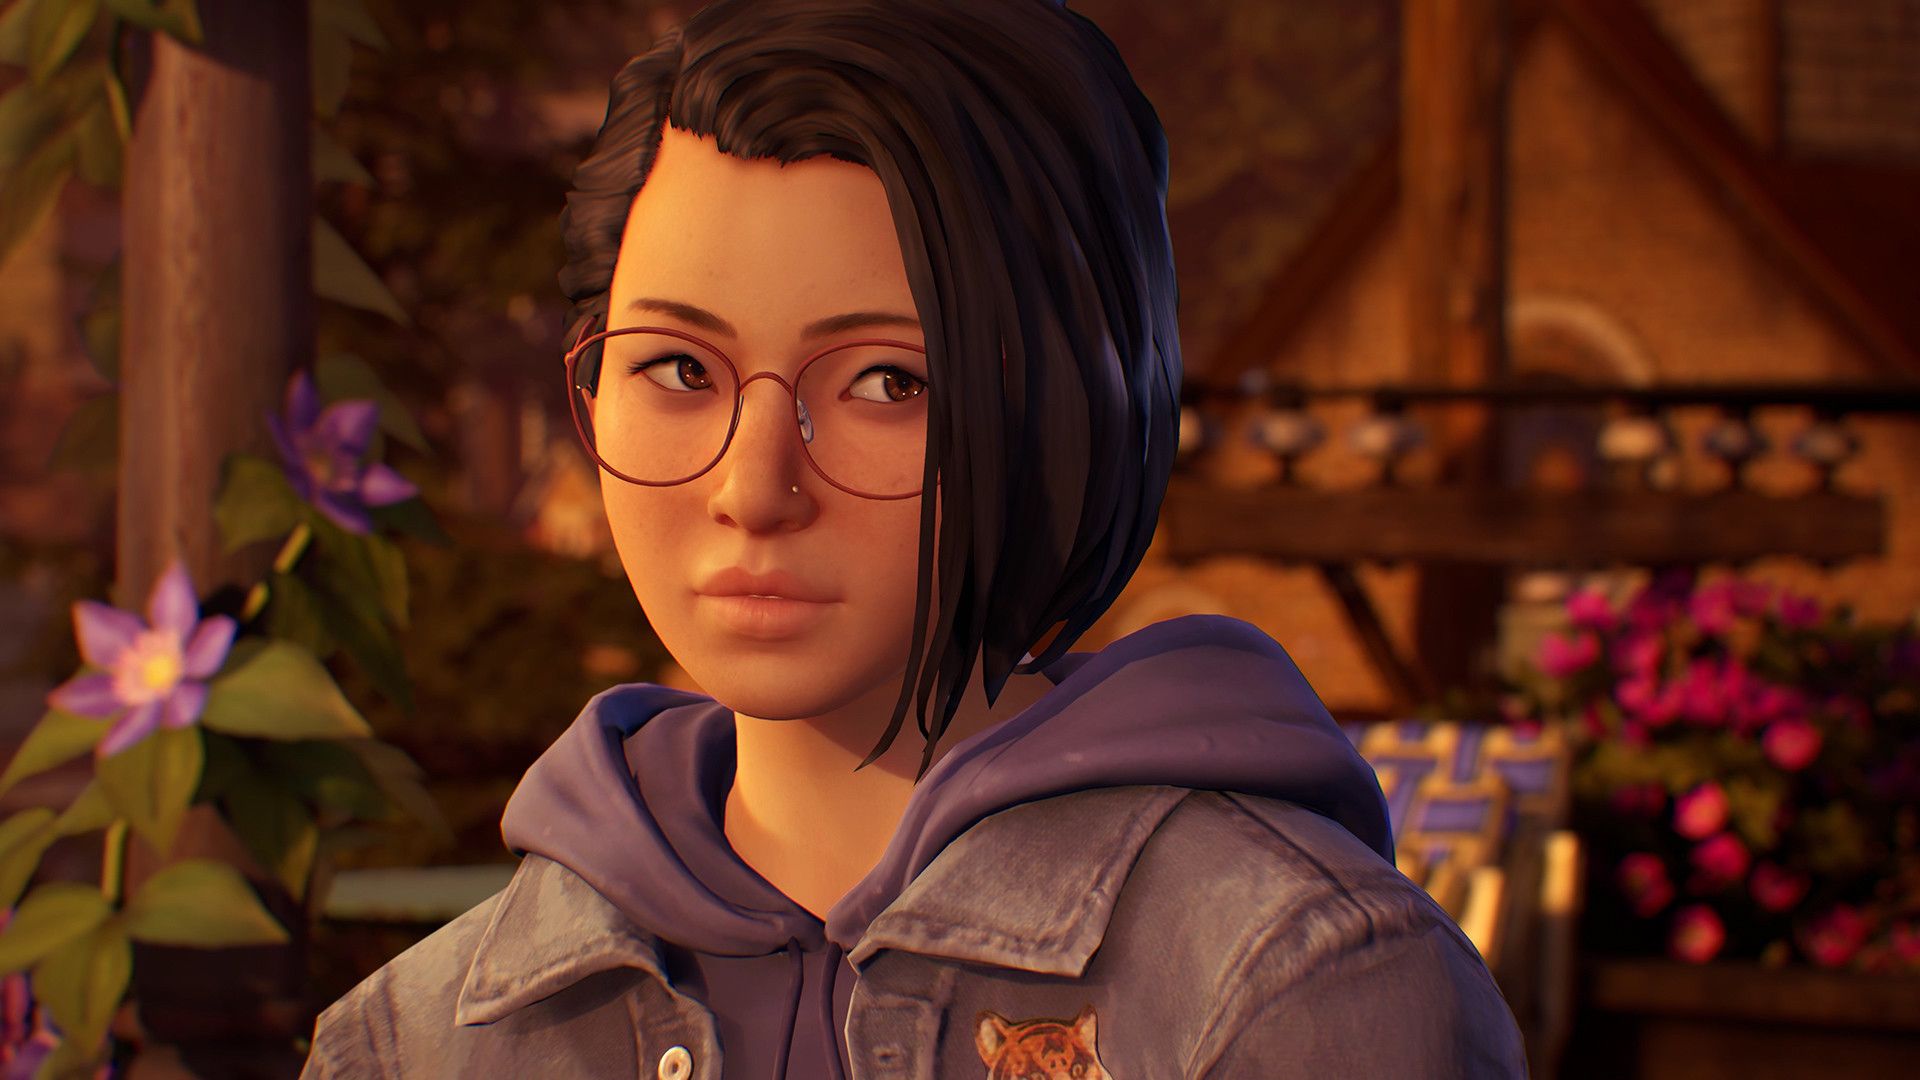 Life is Strange: True Colors introduces Alex Chen with the power to control emotions